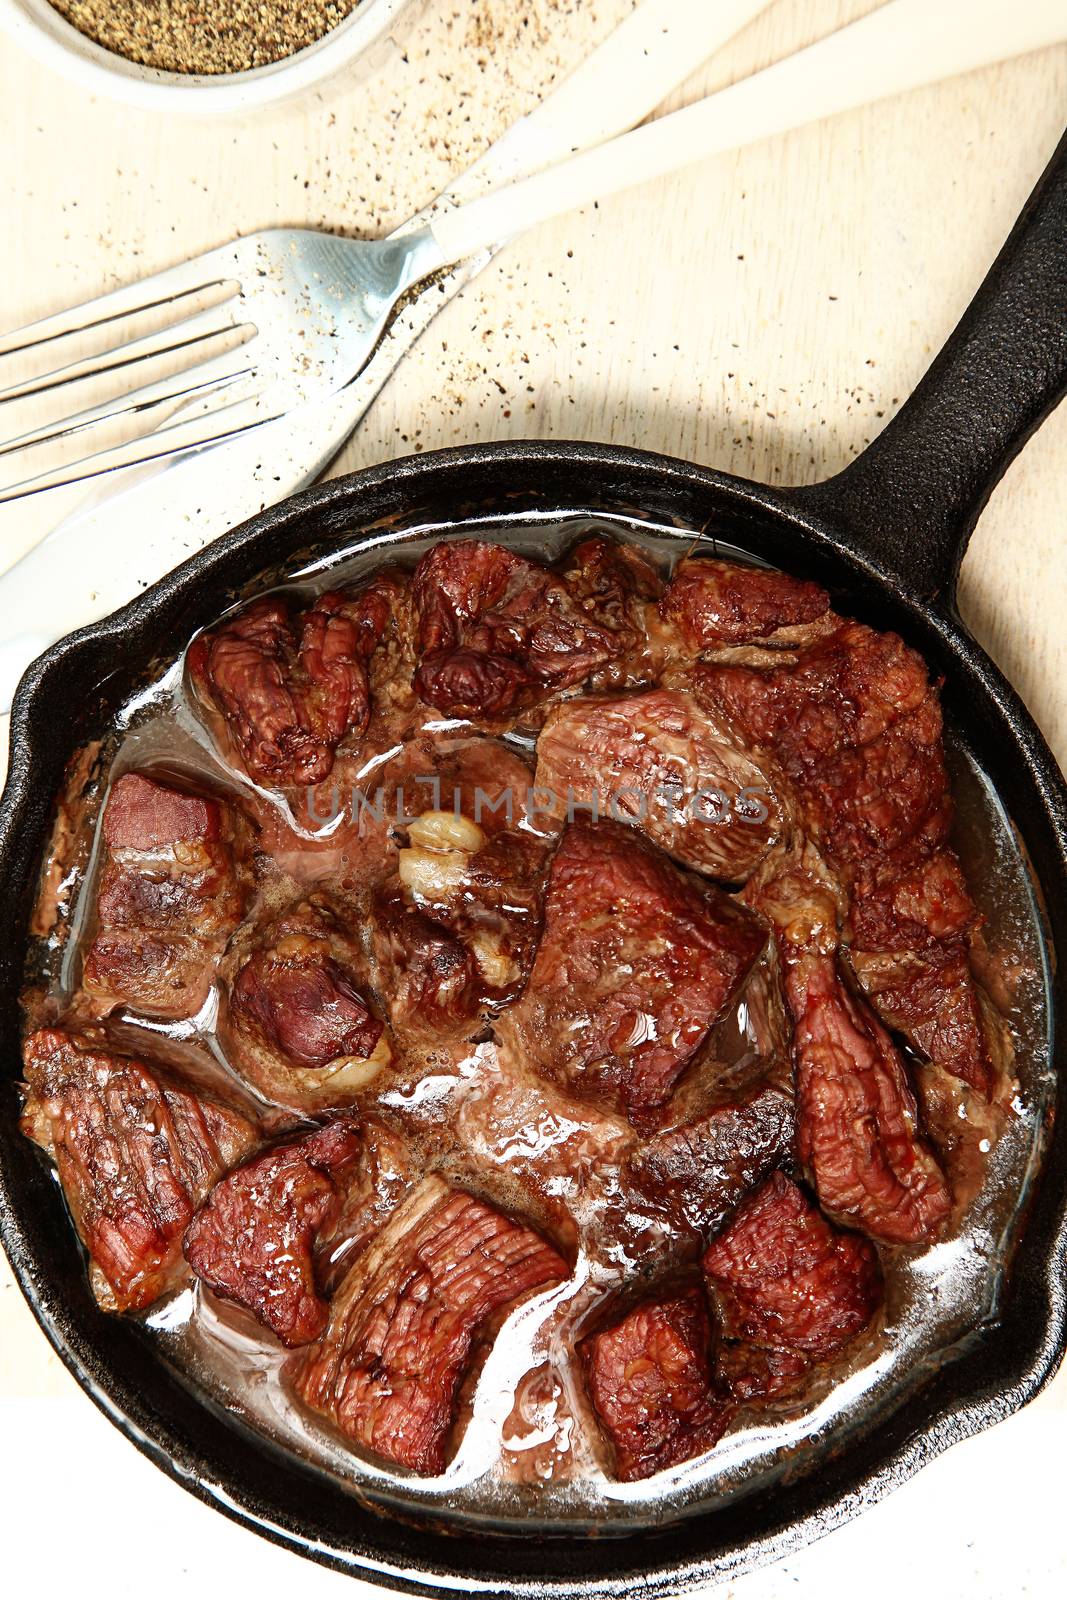 Oven Baked Beef Cubes in Cast Iron Skillet at table or restaurant.